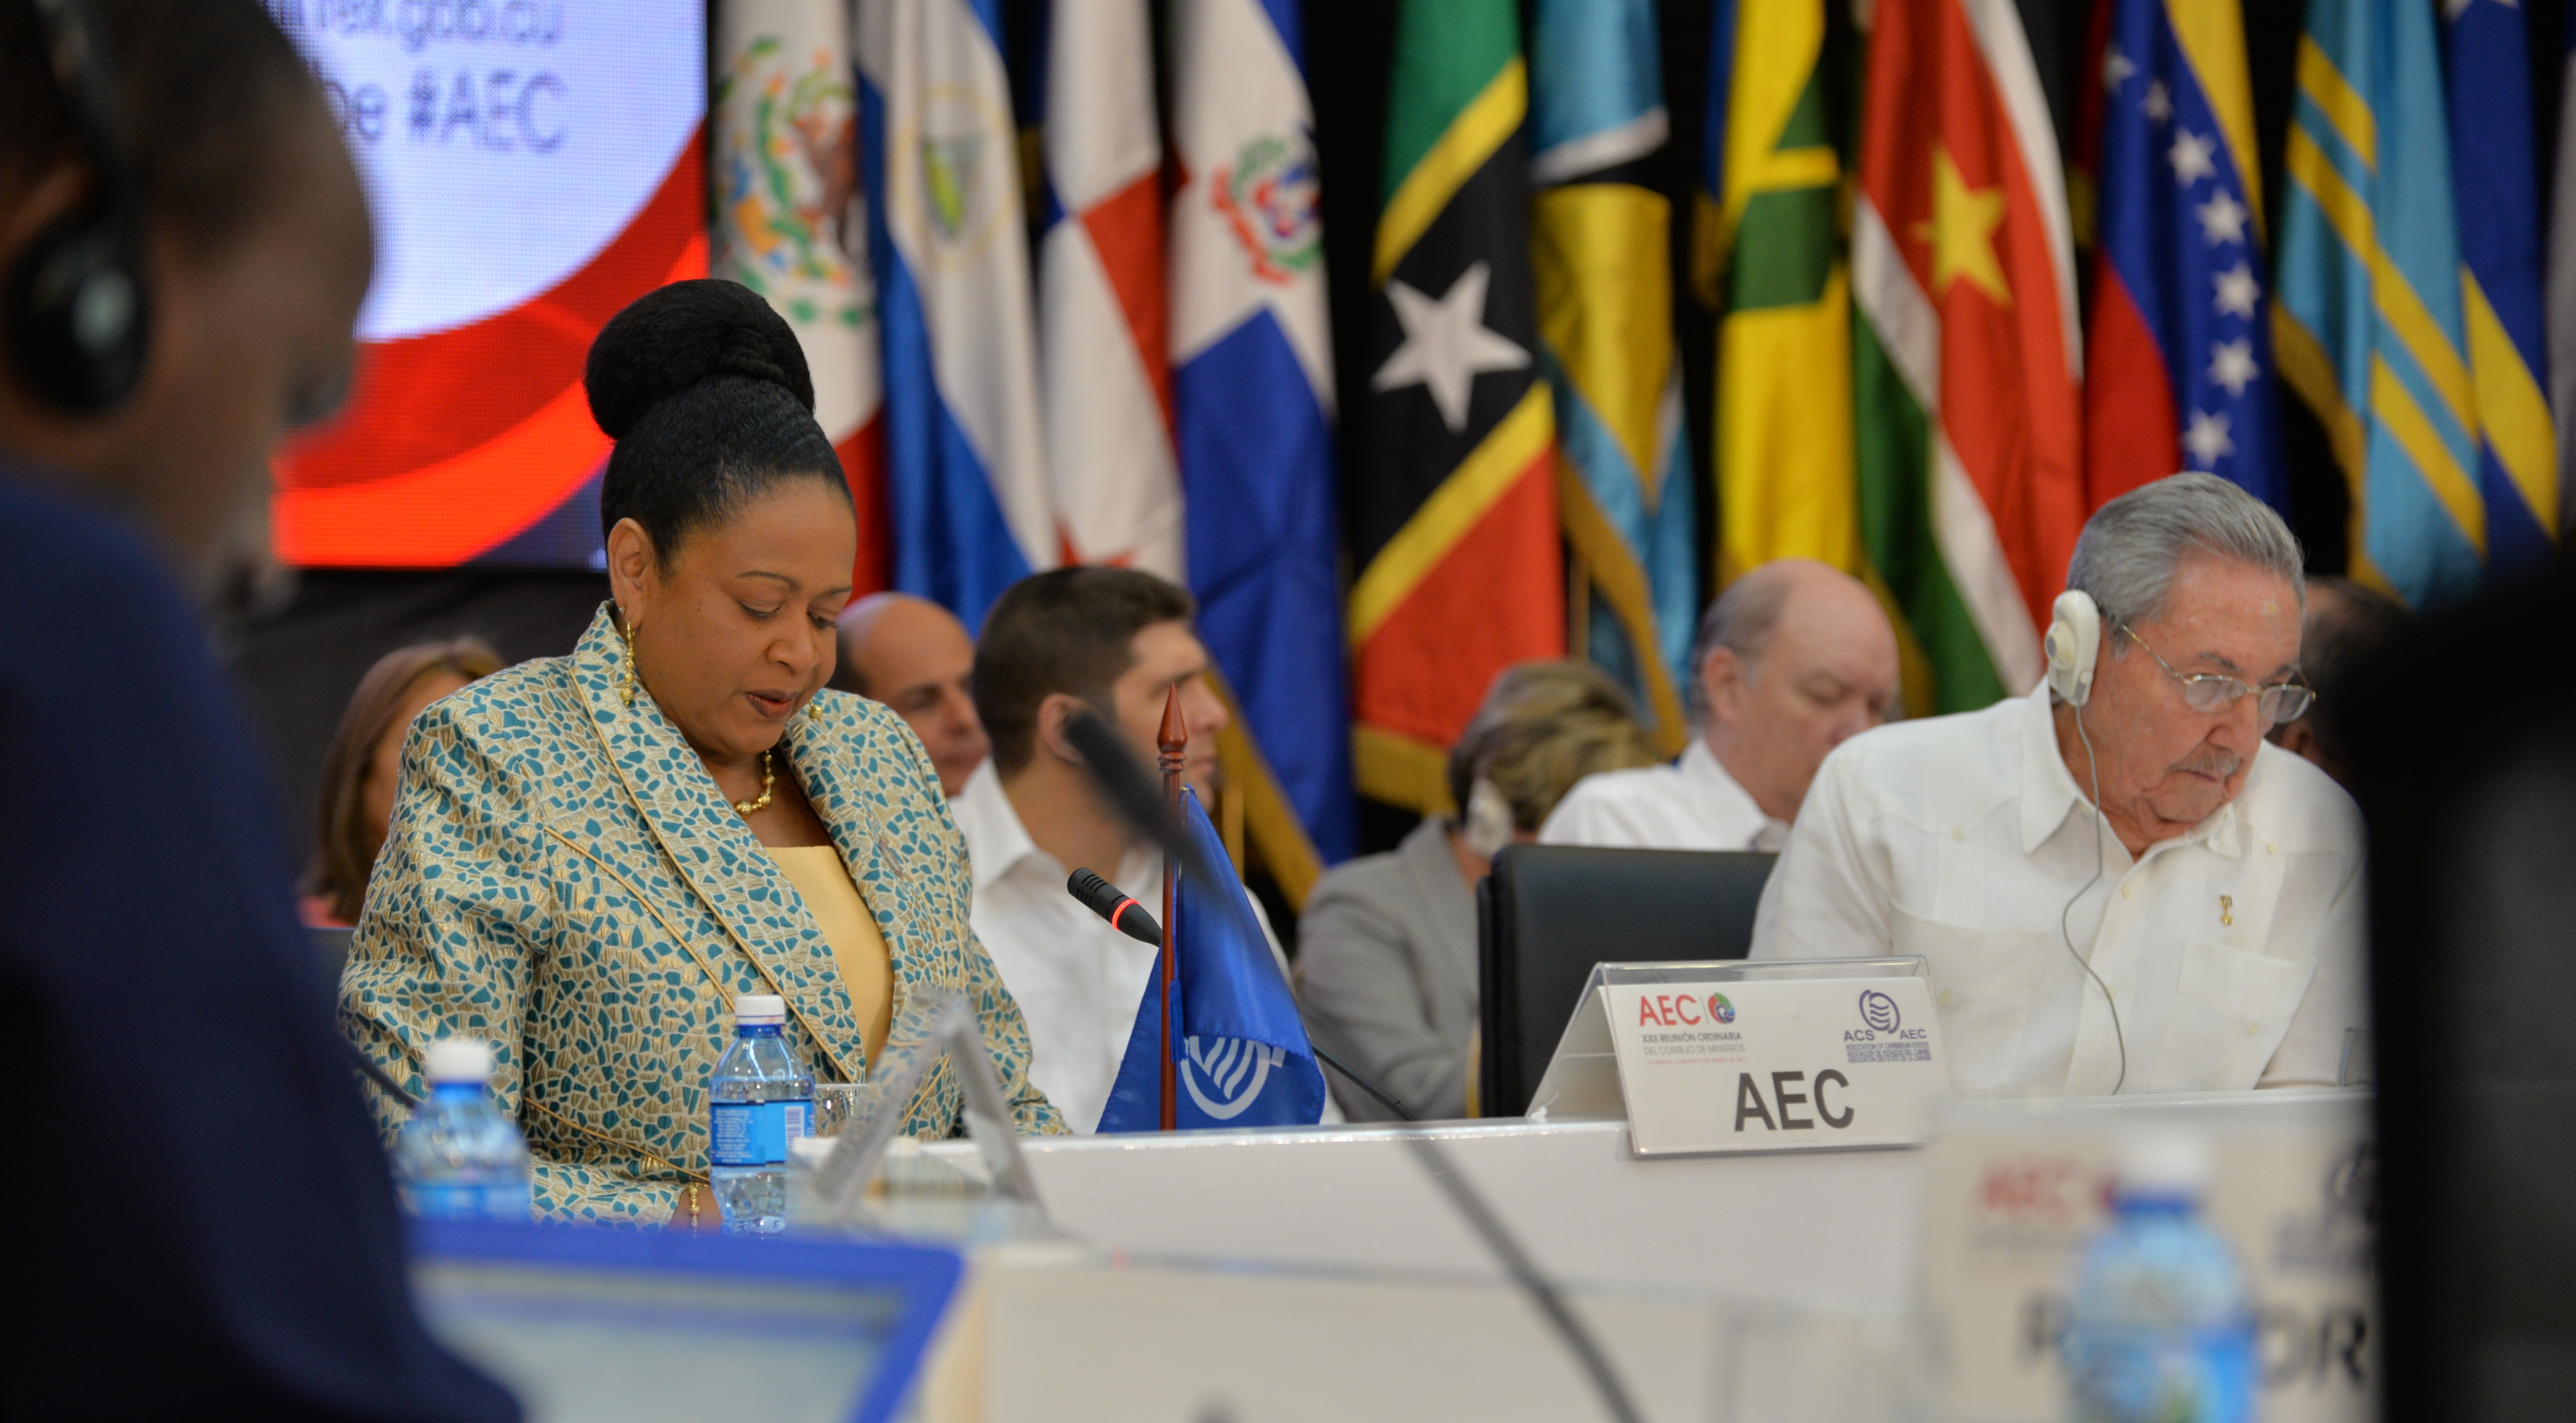 Newly-sworn in ACS Secretary General Dr. June Soomer sits next to Cuban President Raul Castro during her opening remarks at the 22nd Ordinary Meeting of the ACS.